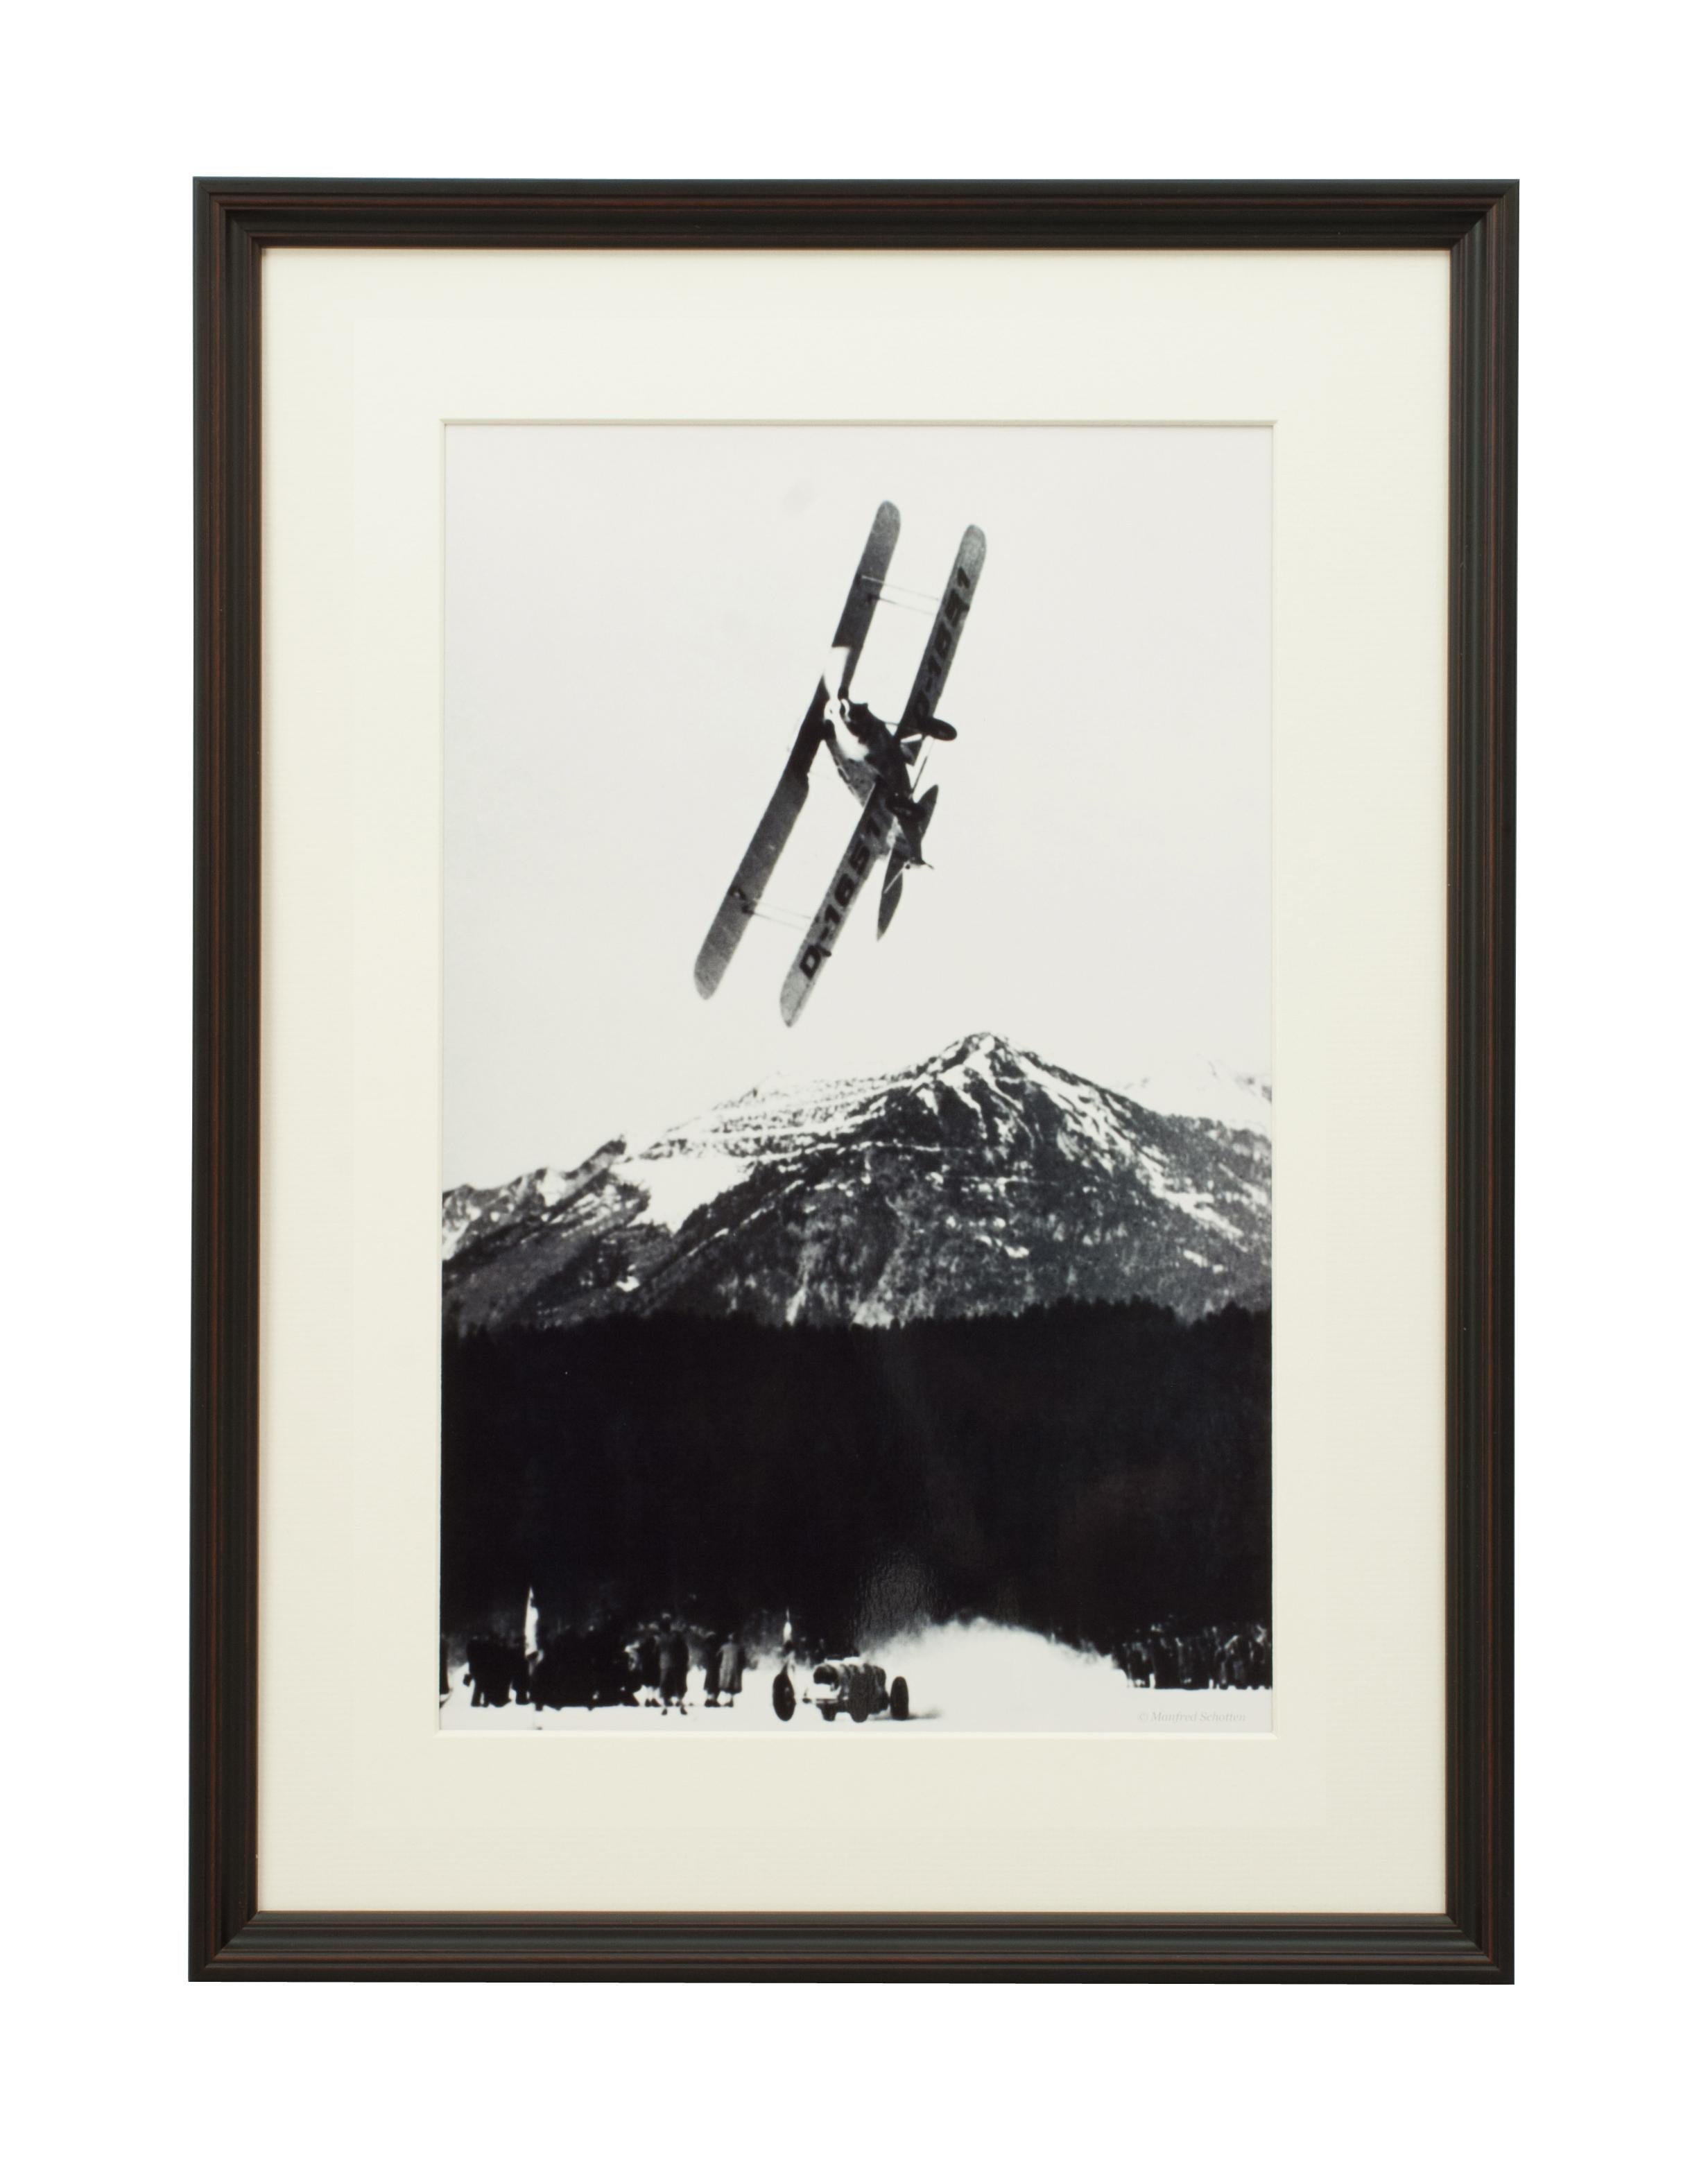 Vintage Style Photography, Framed Alpine Ski Photograph, The Race.
'THE RACE', a modern framed and mounted black and white photograph after an original 1930's skiing photograph. The frame is black with burgundy undercoat, the glazing is clarity+